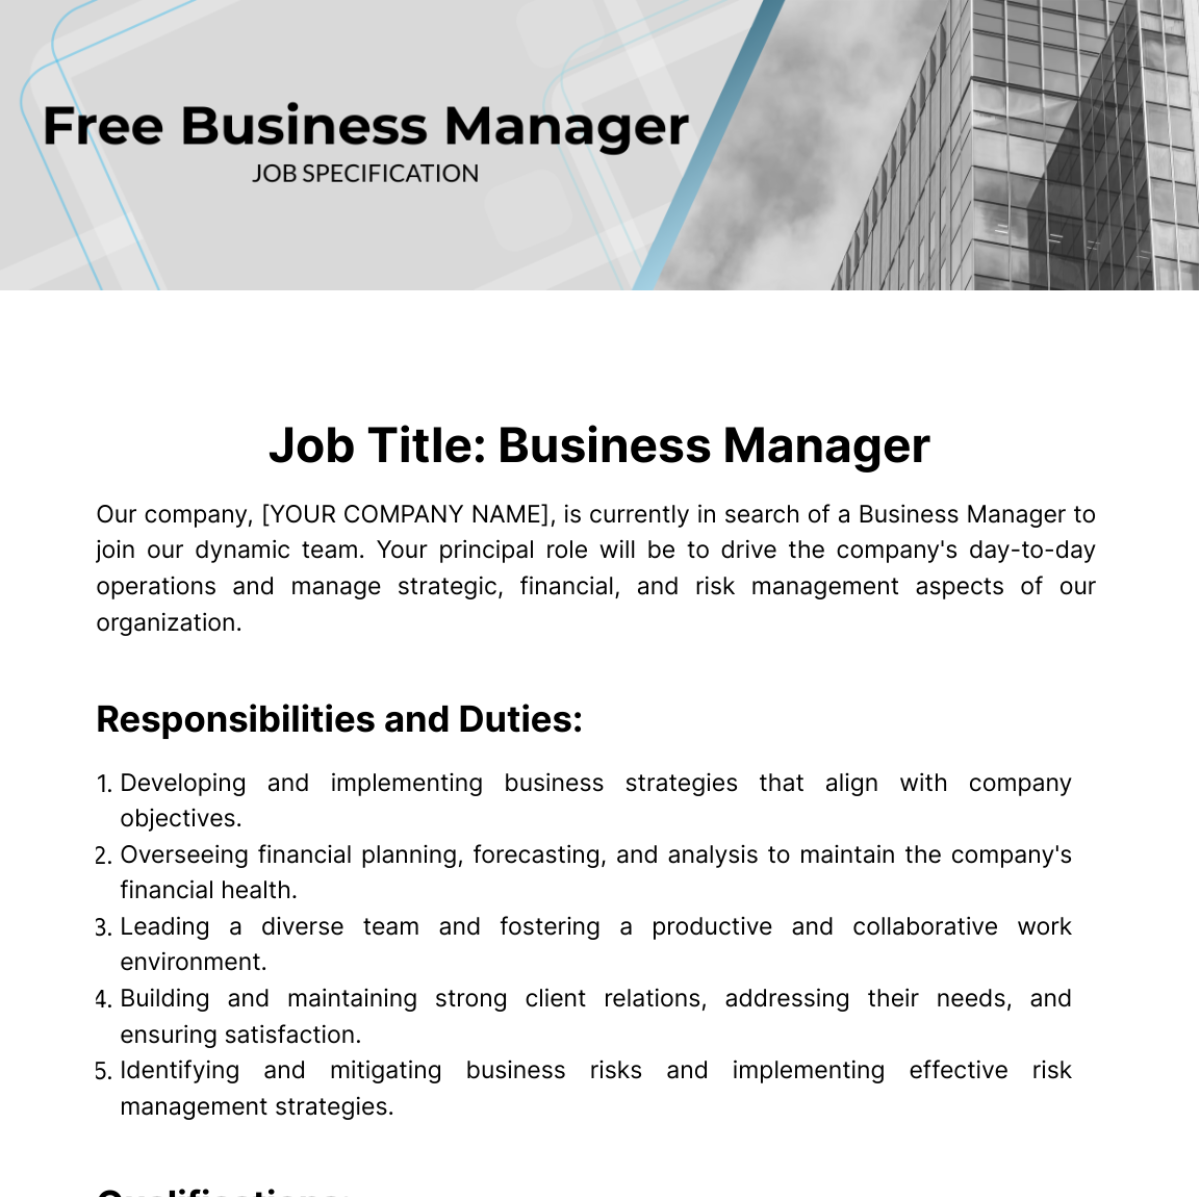 Business Manager Job Specification Template